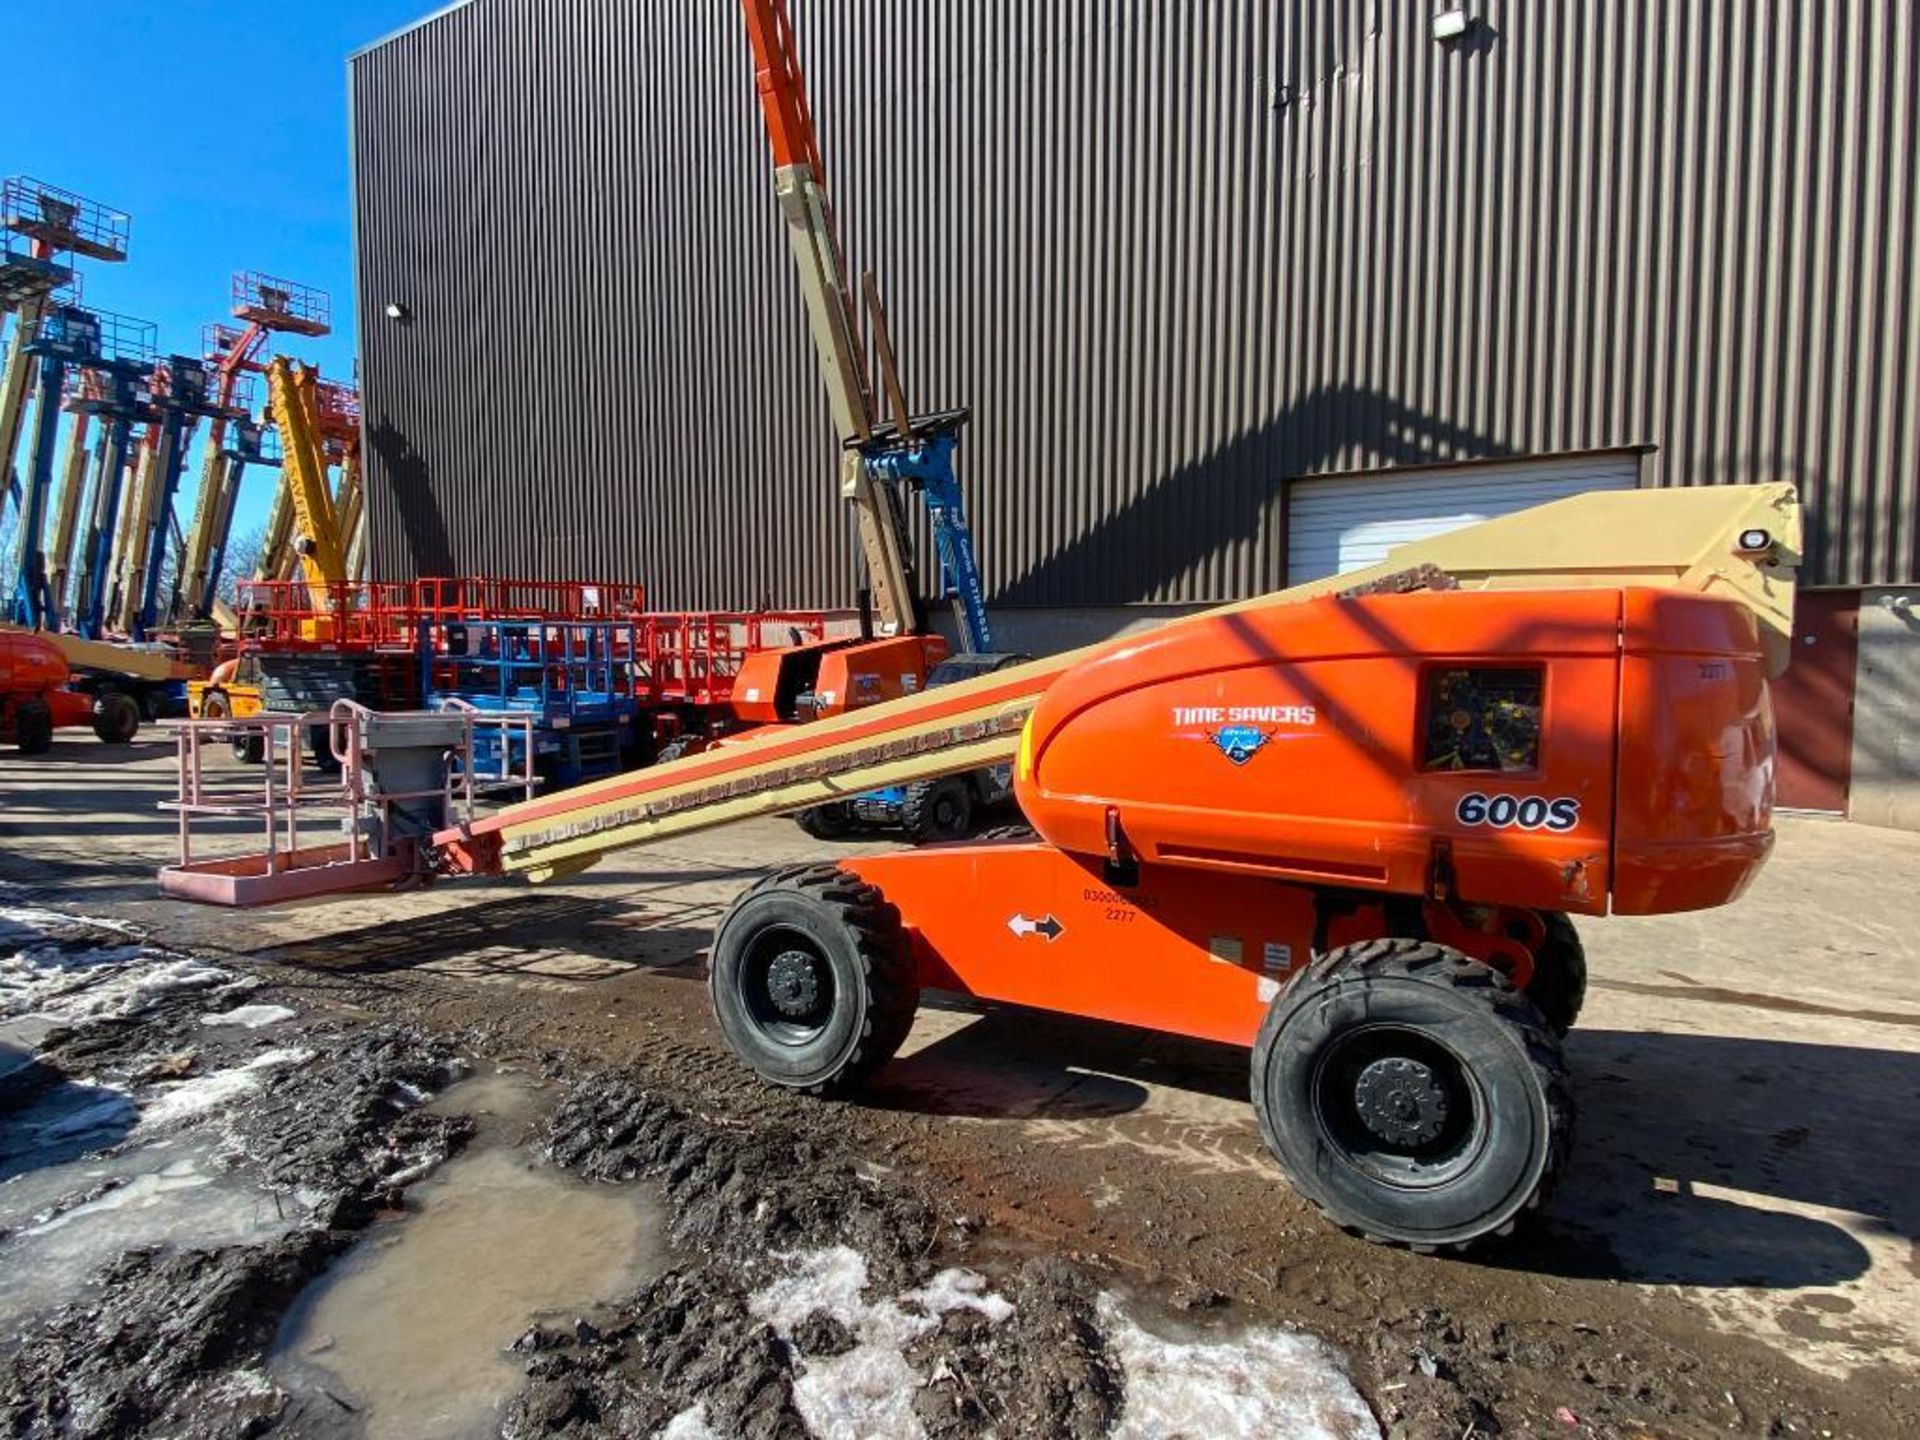 JLG 600S Rough Terrain Boom Lift (S/N 300063683, Year 2001), with 60' Platform Height, 49.47'